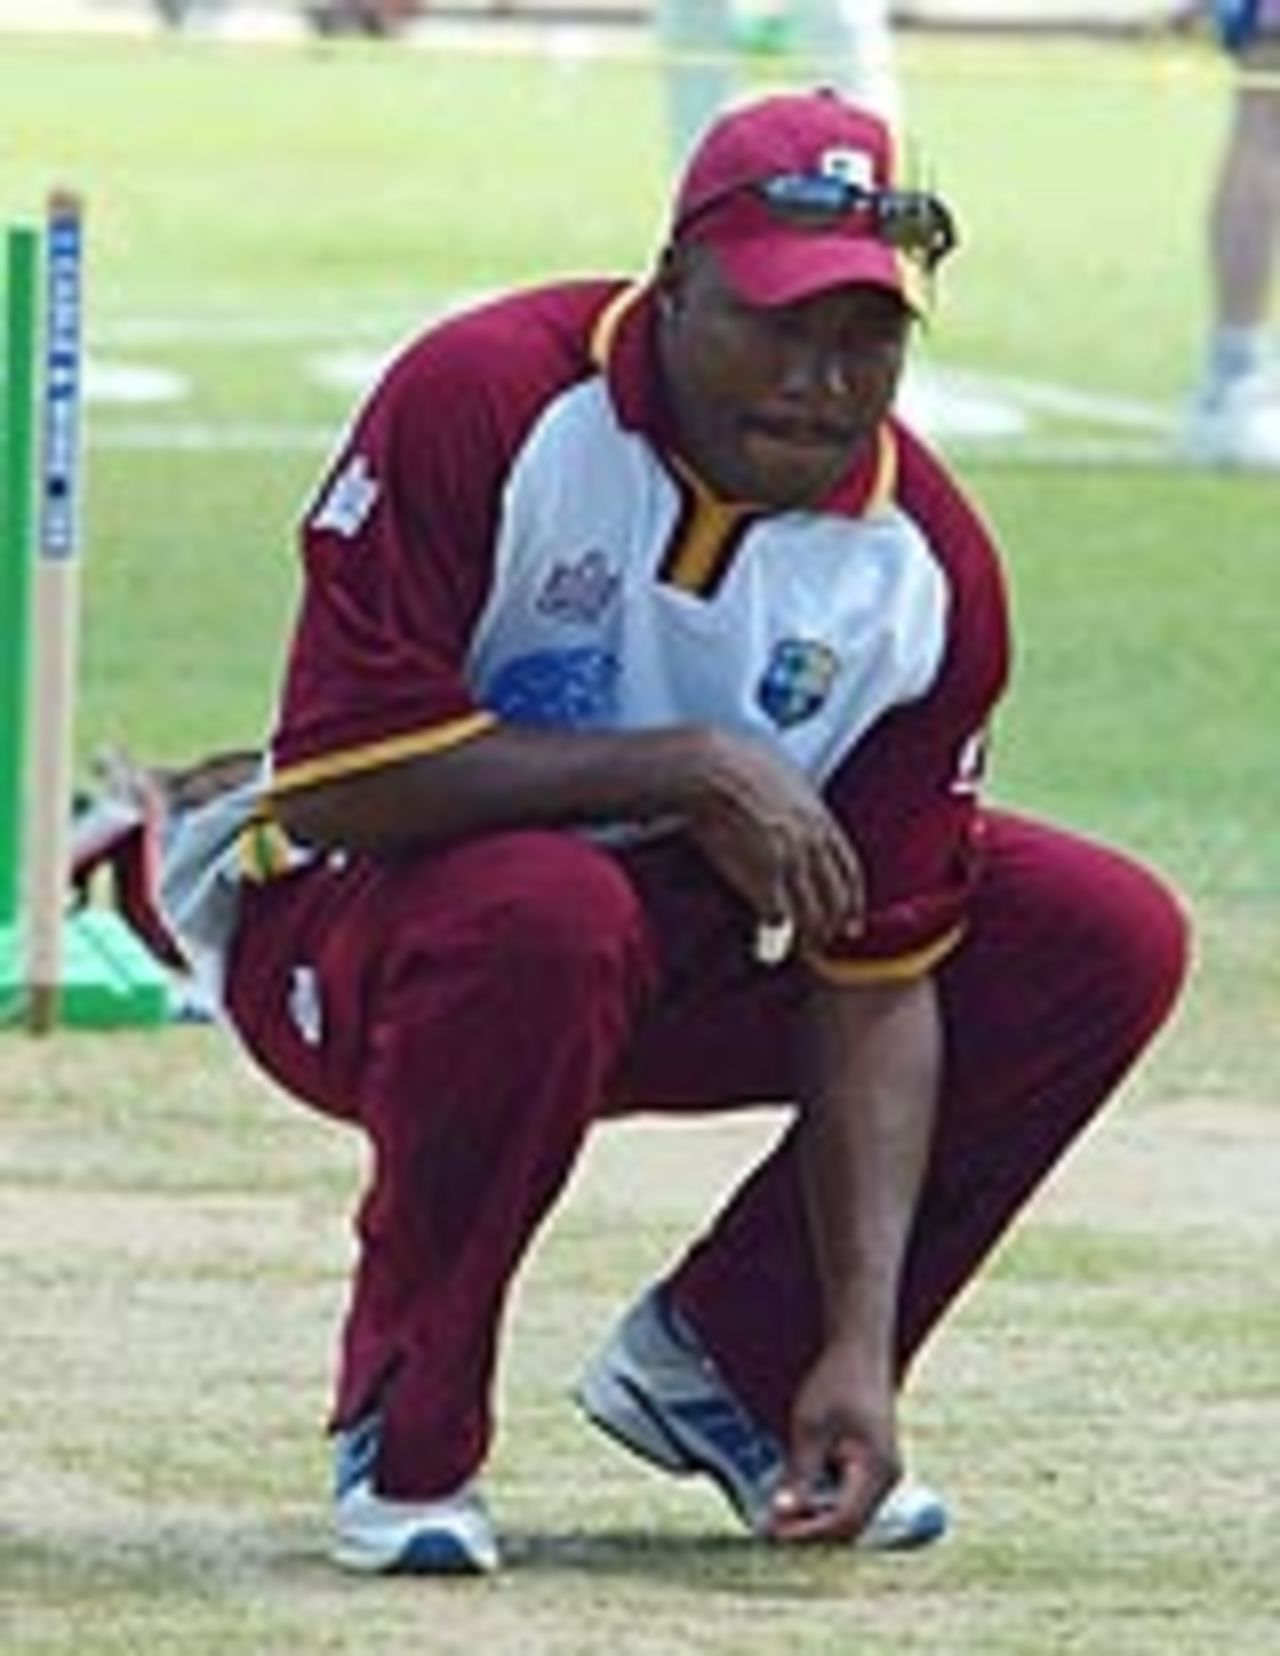 Brian Lara inspects the wicket, Trinidad, March 19, 2004